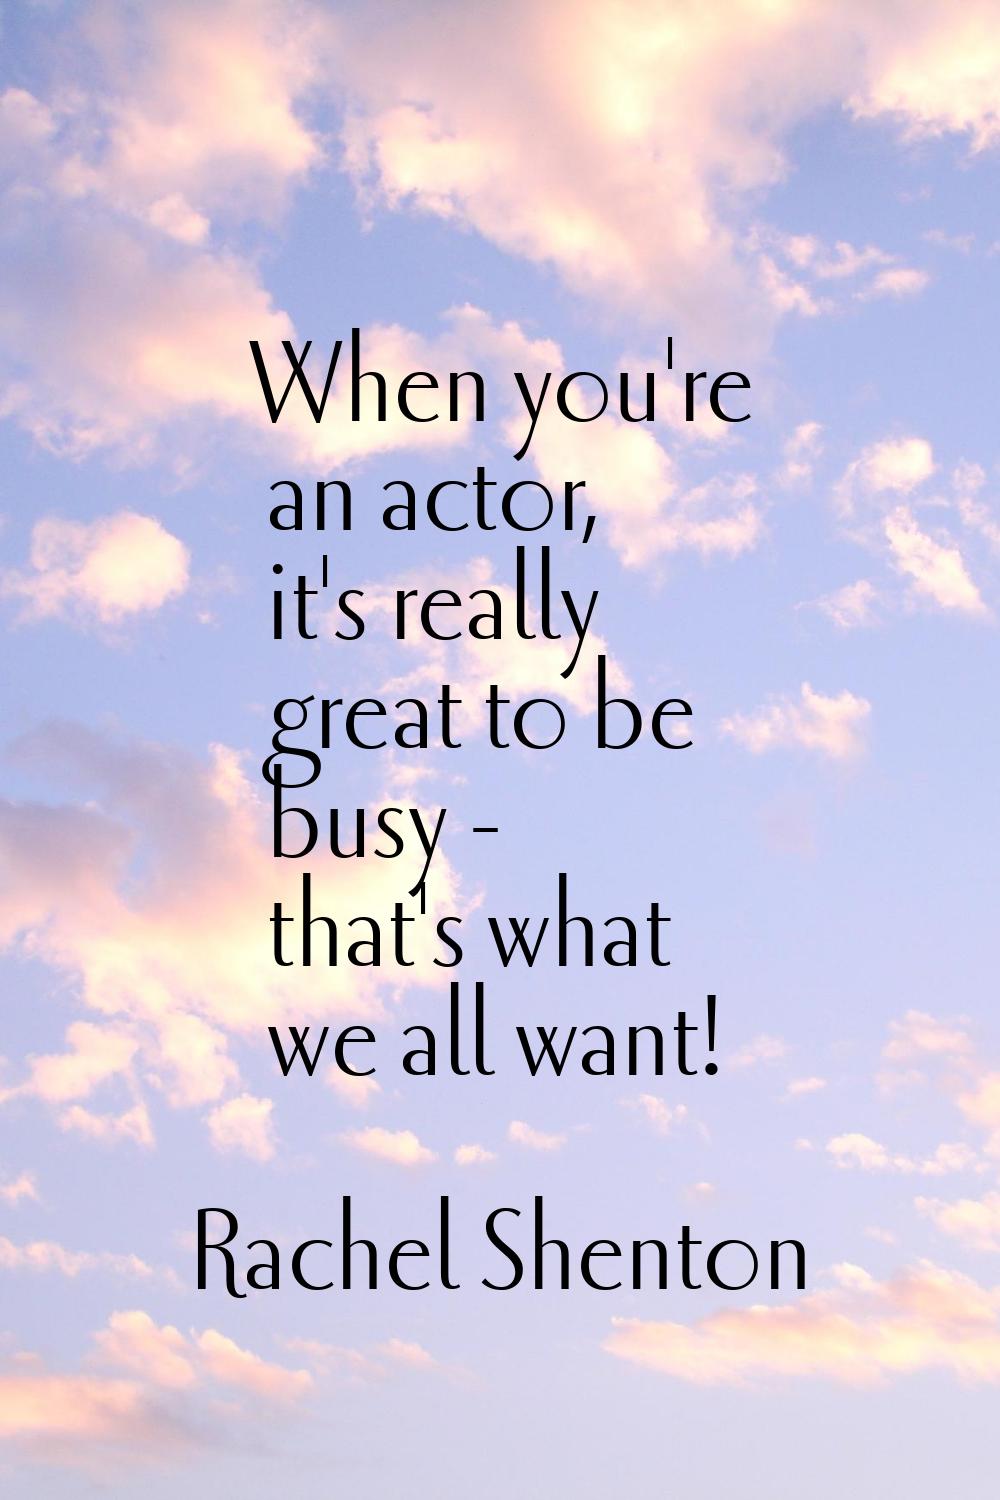 When you're an actor, it's really great to be busy - that's what we all want!